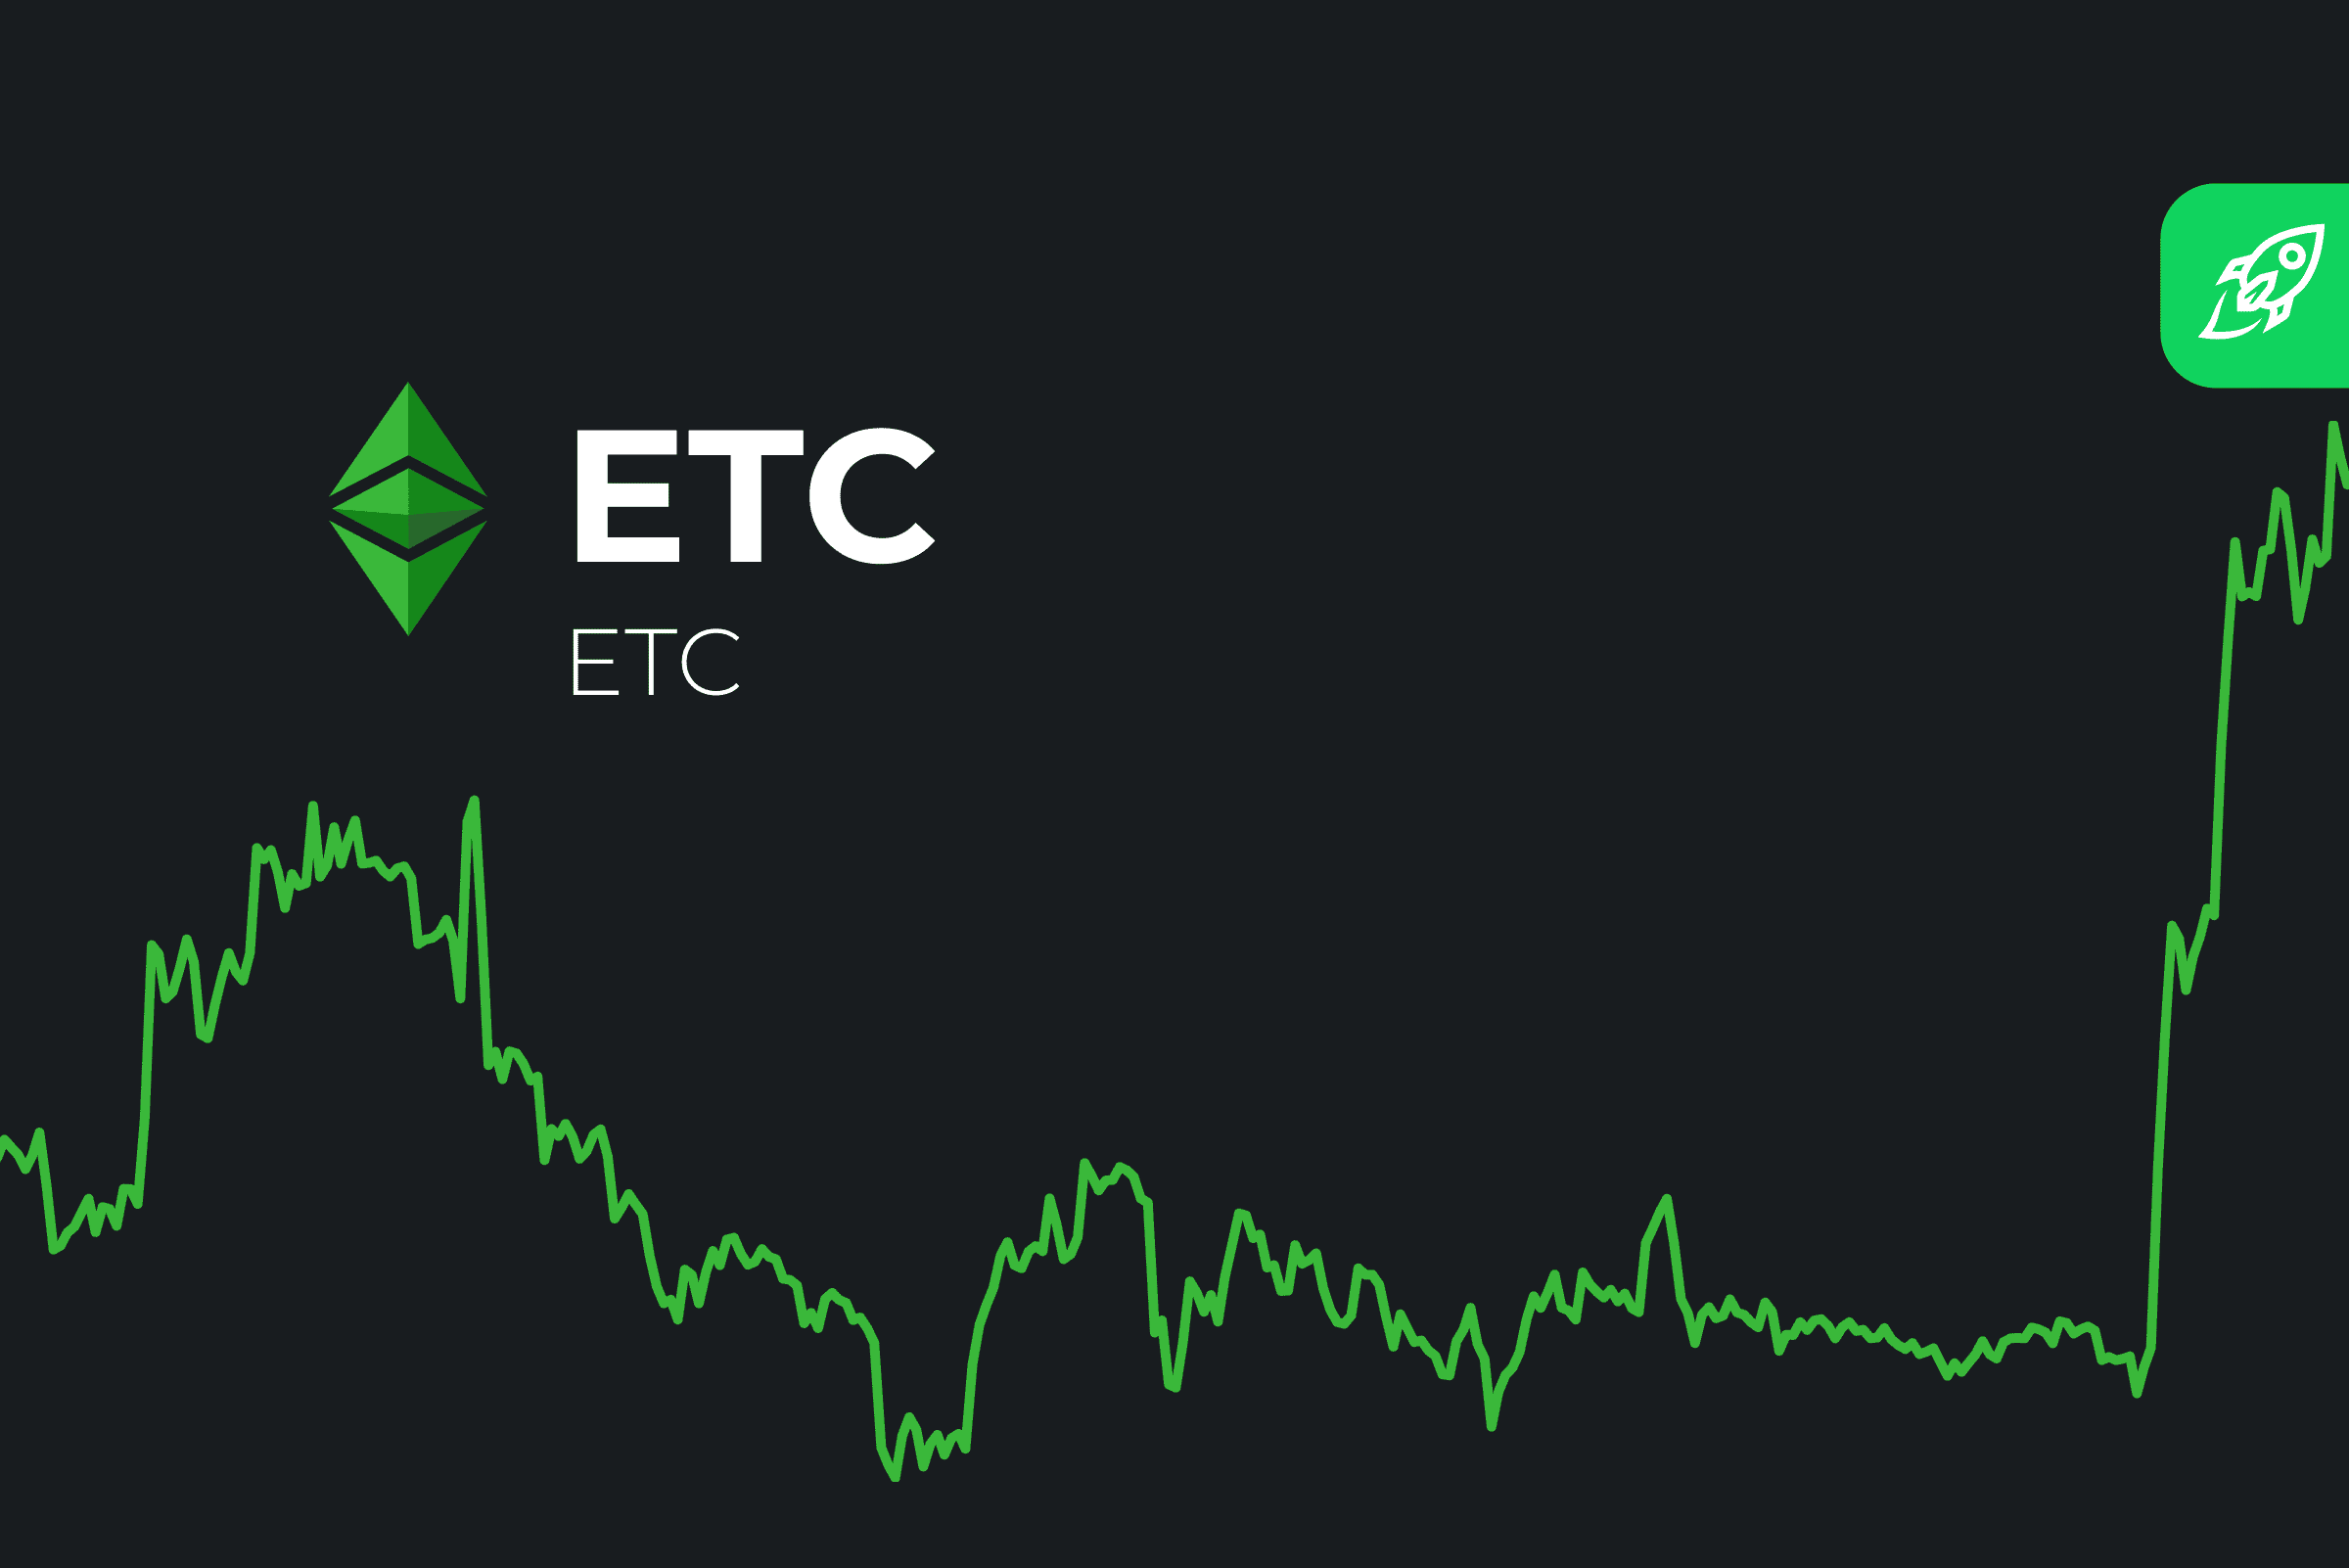 Ethereum Classic Price to AUD - ETC Price Index & Live Chart | The Top Coins